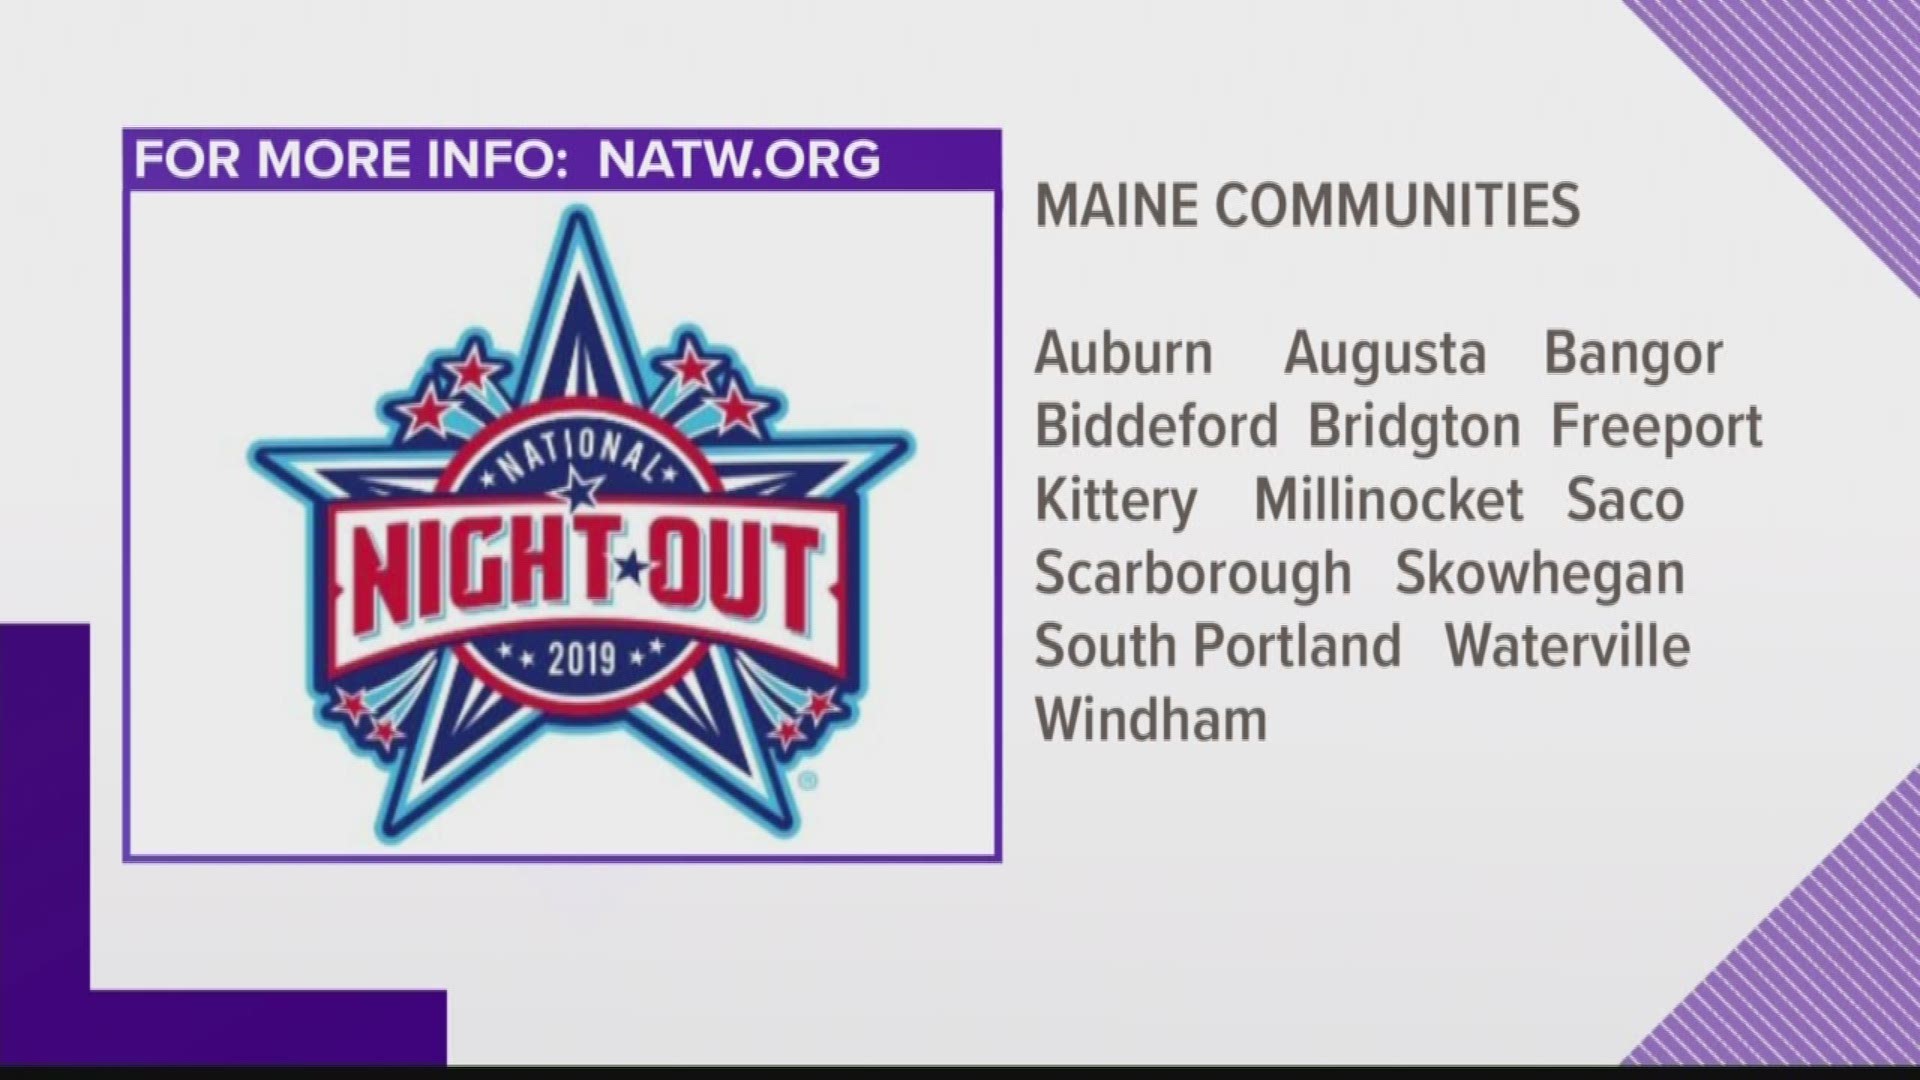 Across Maine and the U.S. on Tuesday, August 6, communities are coming together with police for National Night Out.